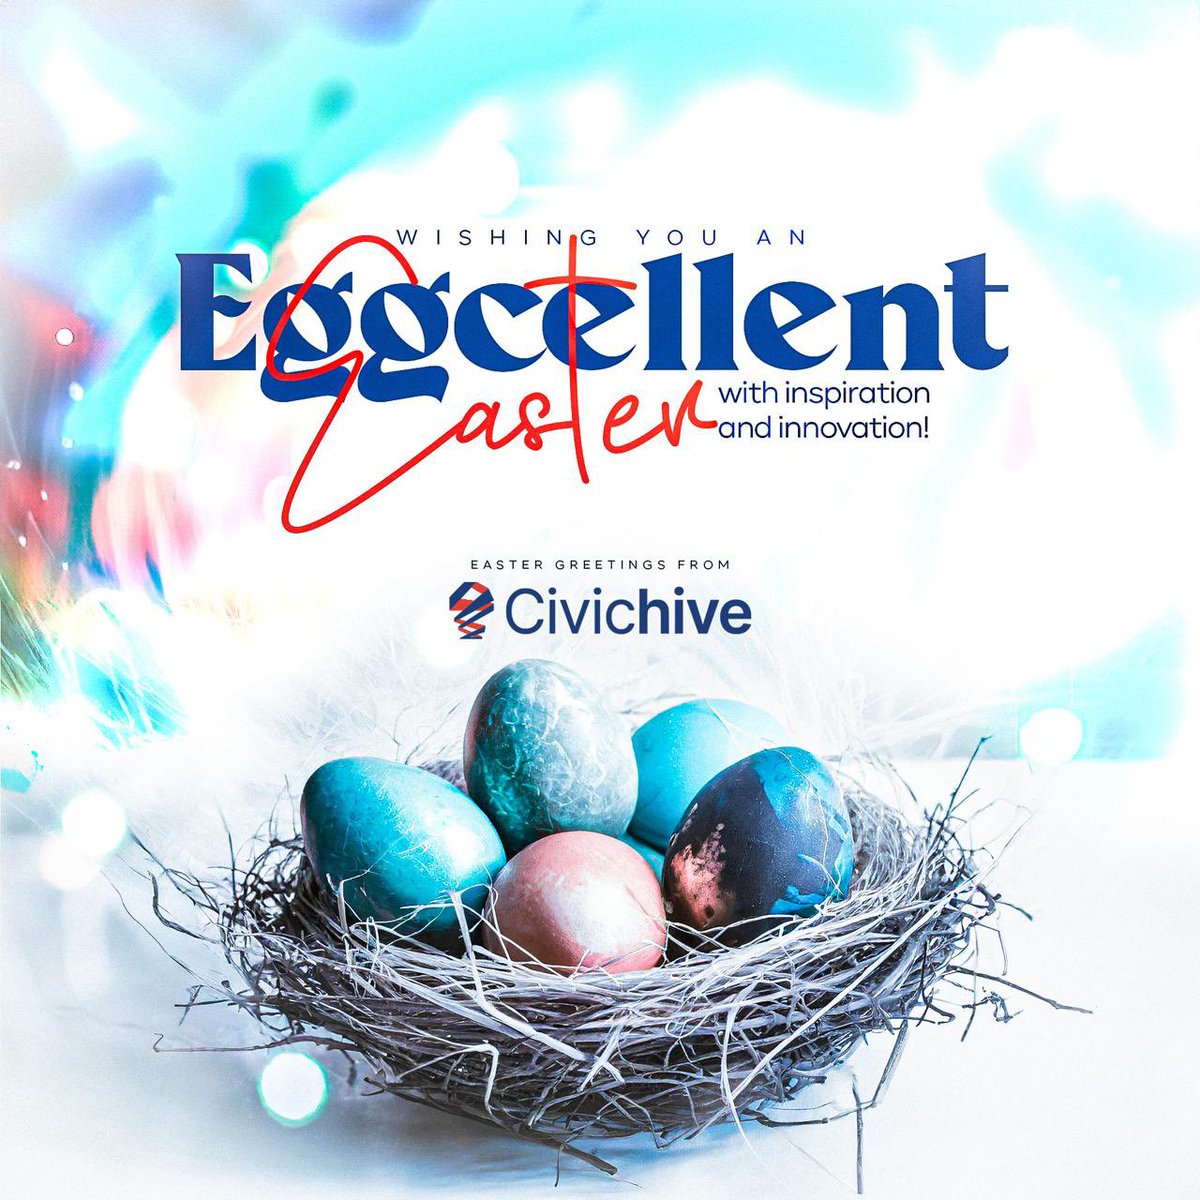 Vaulting into Easter with a basket full of hope and community! 🐣🌷 Wishing you a joy-filled celebration from all of us at Civic Hive.